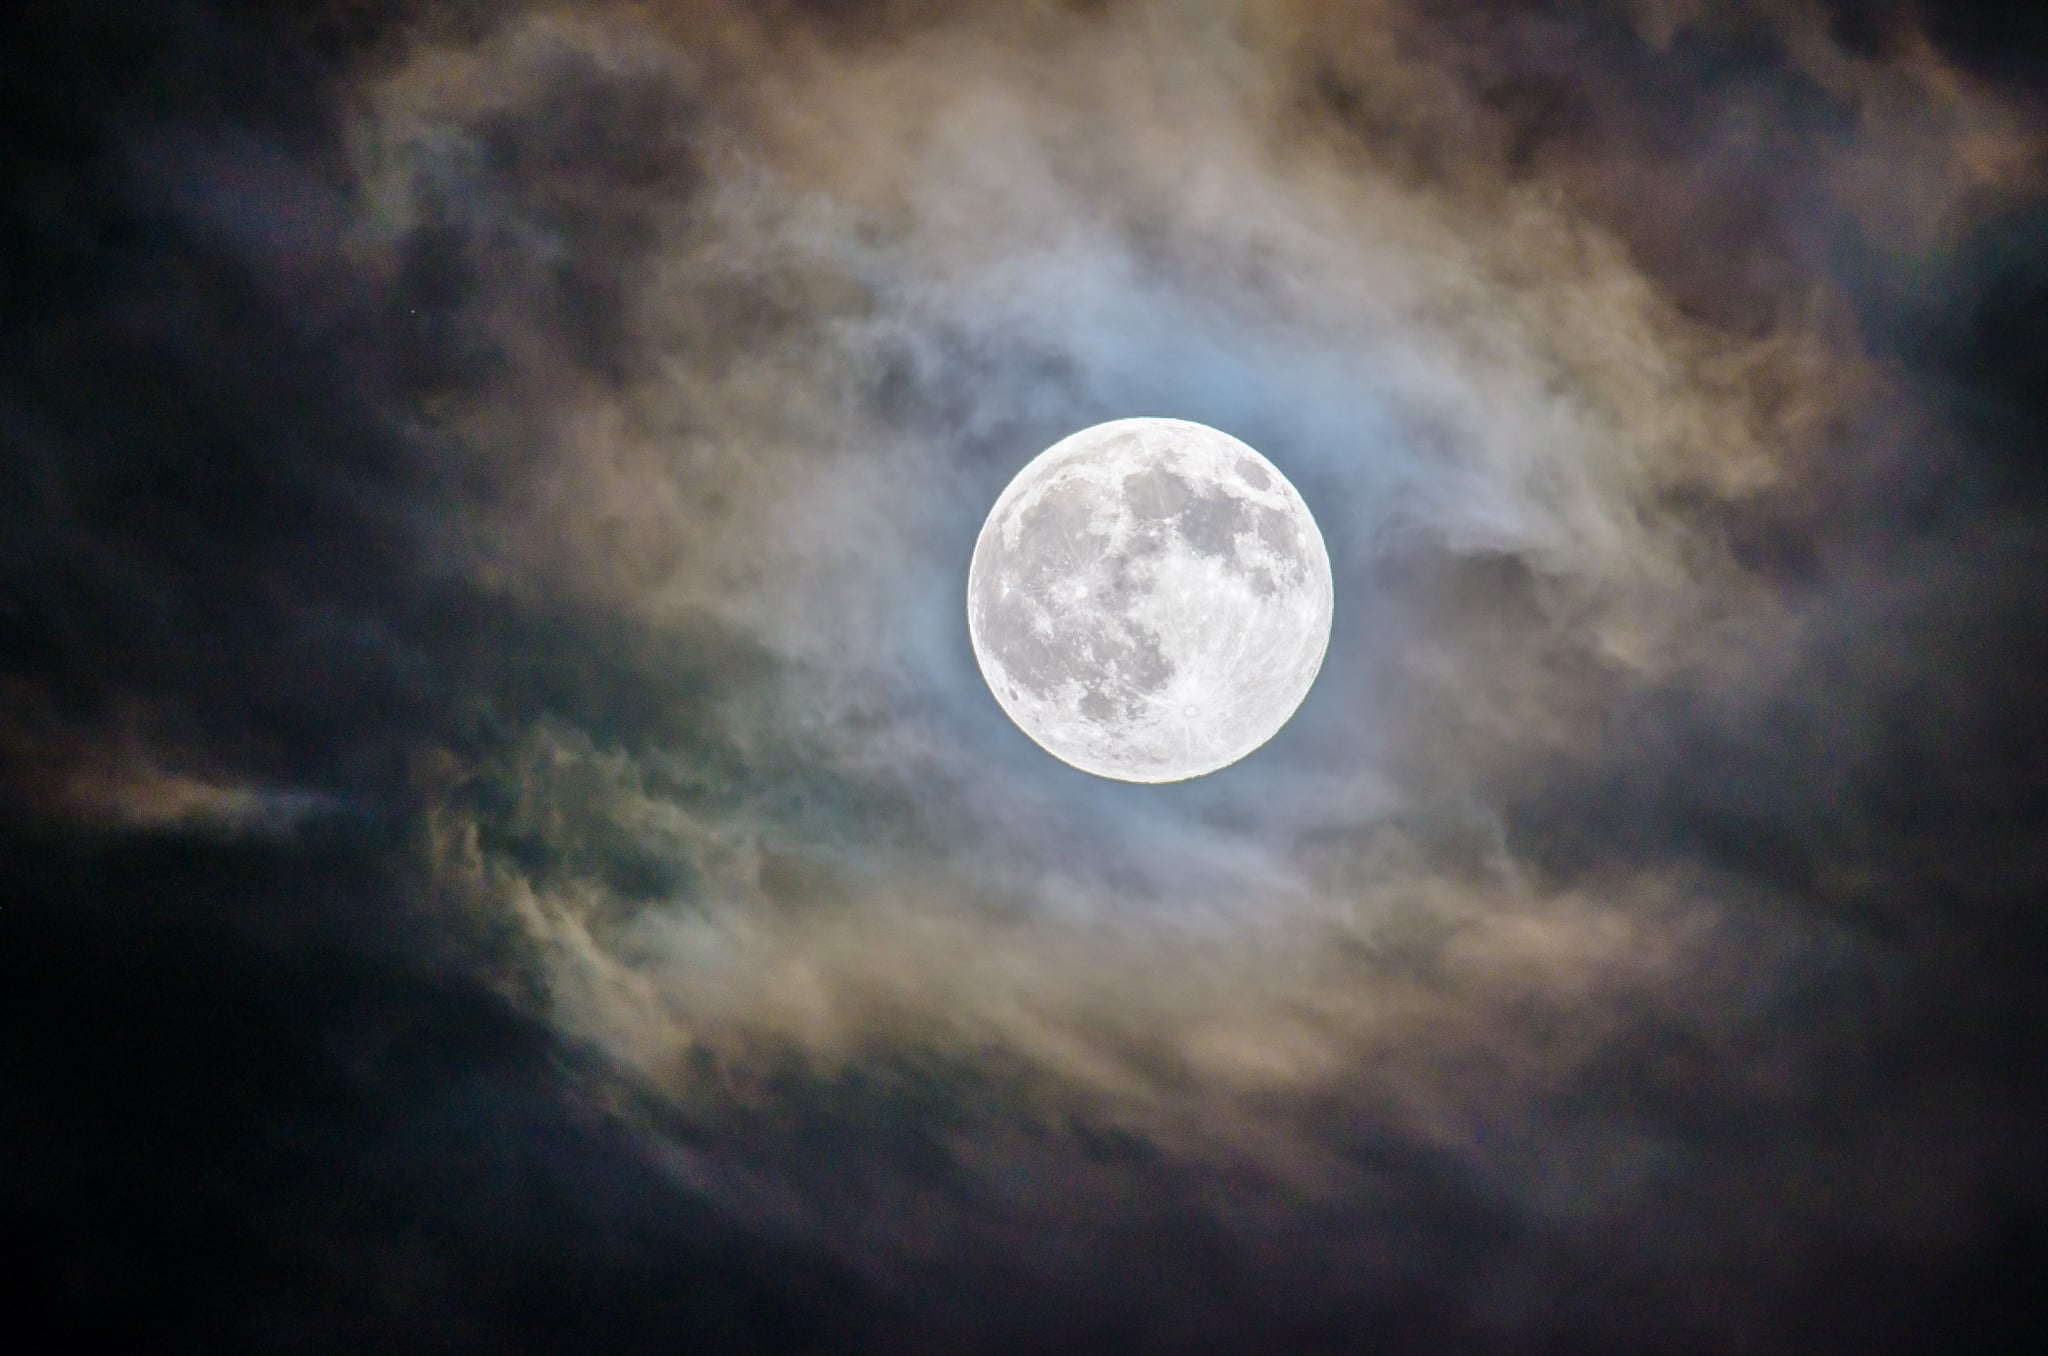 two moon park halloween 2020 Here Are All The Cool Moon Events In 2020 Popsugar Smart Living two moon park halloween 2020